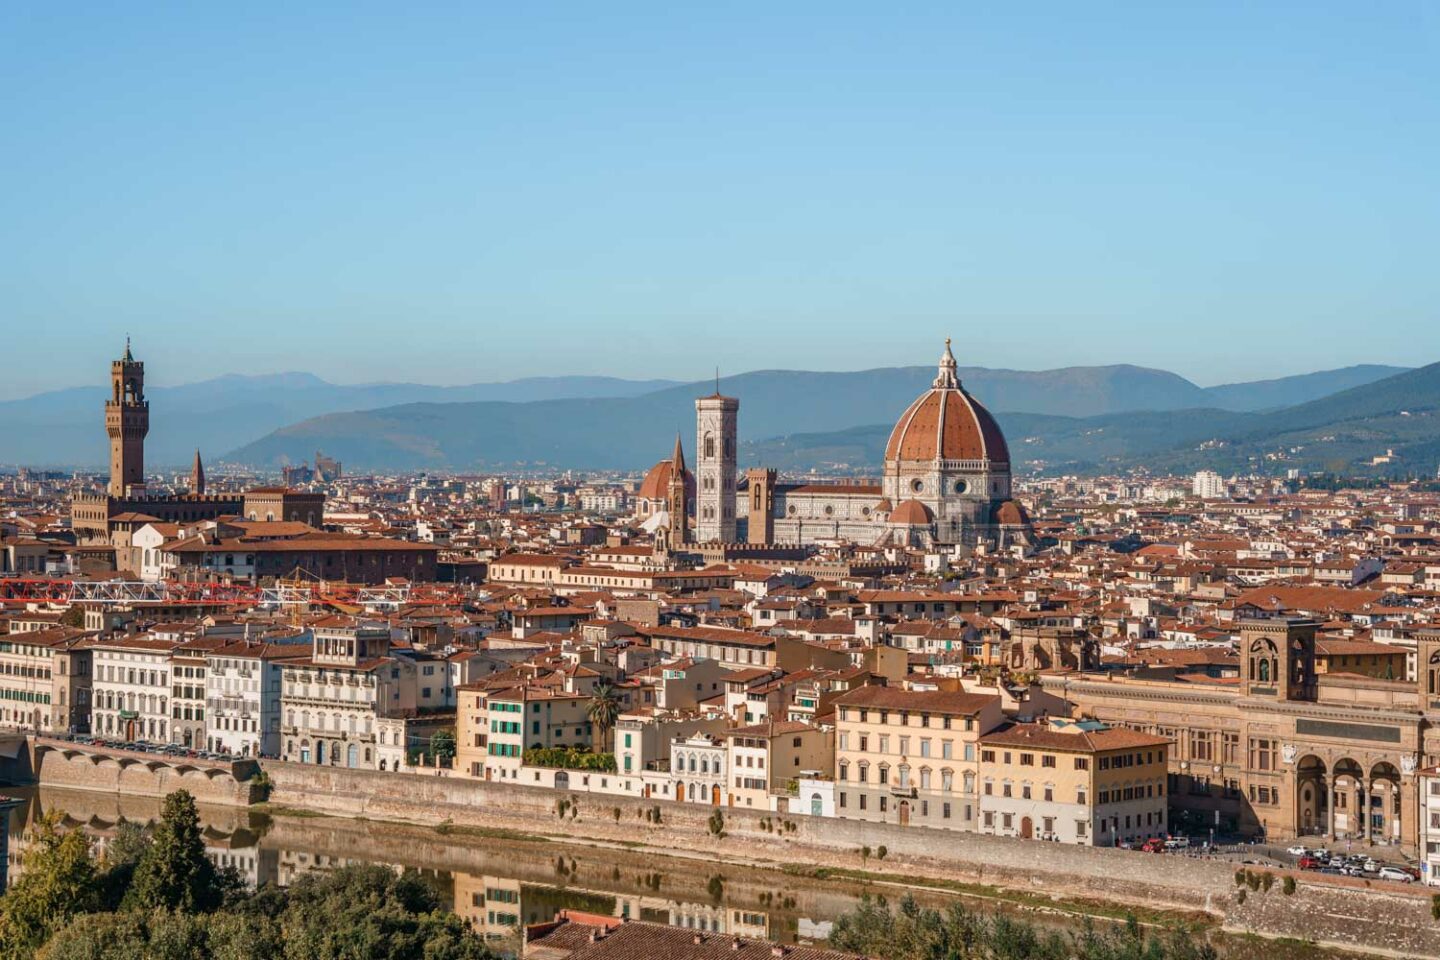 Is Florence worth visiting for the views